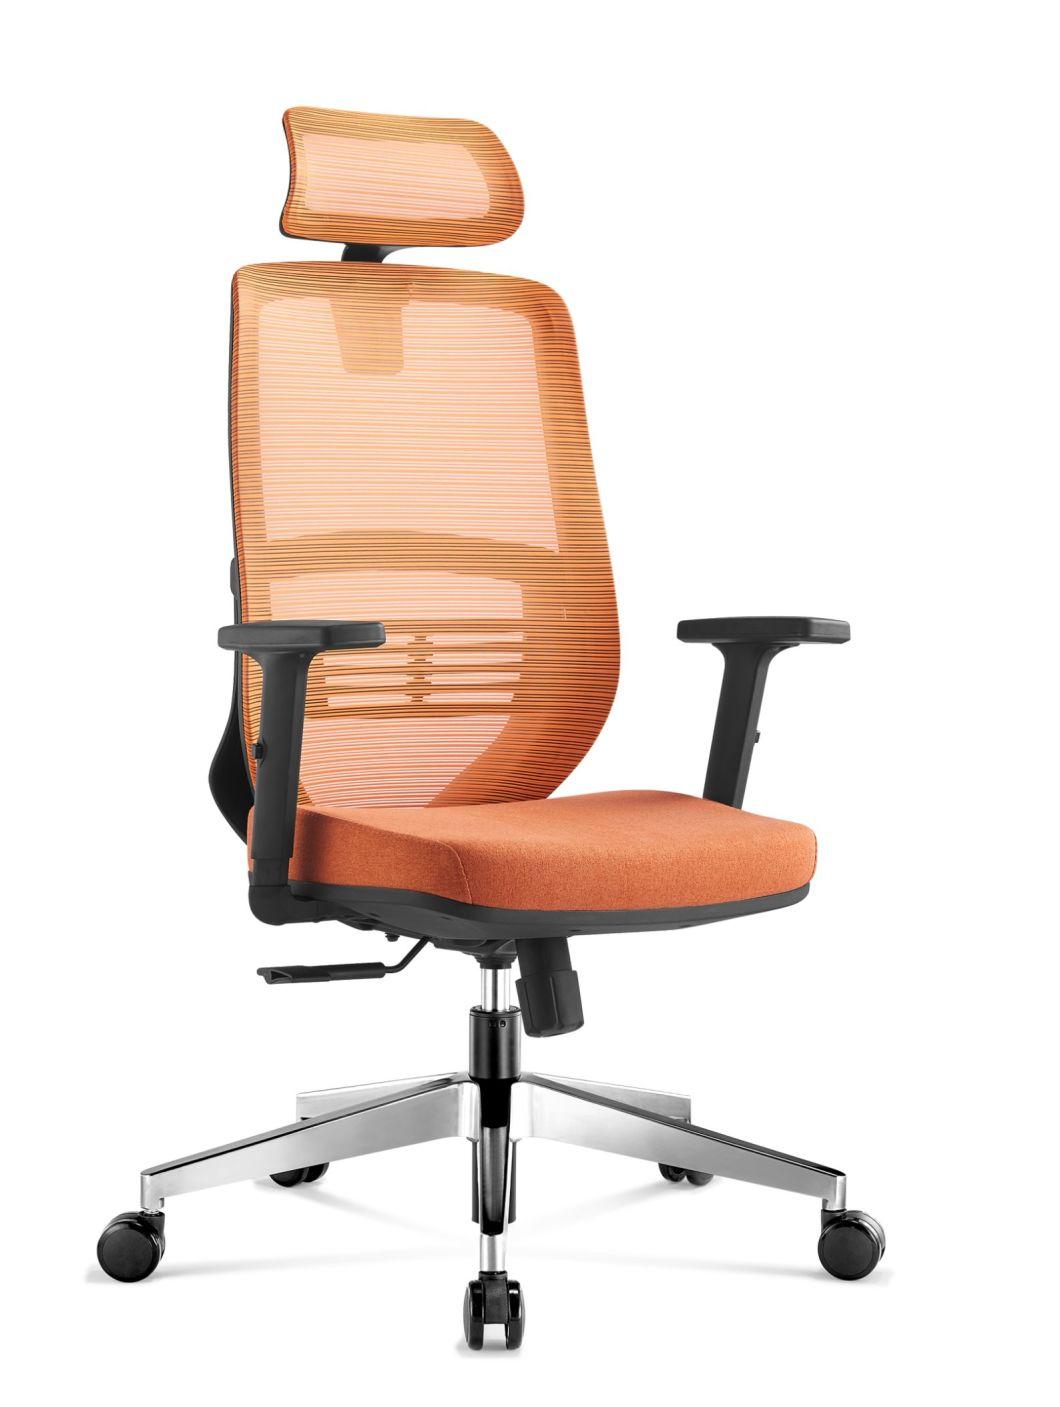 Modern Hotel Game Play Swivel Conference Executive Leather Chair Office Furniture